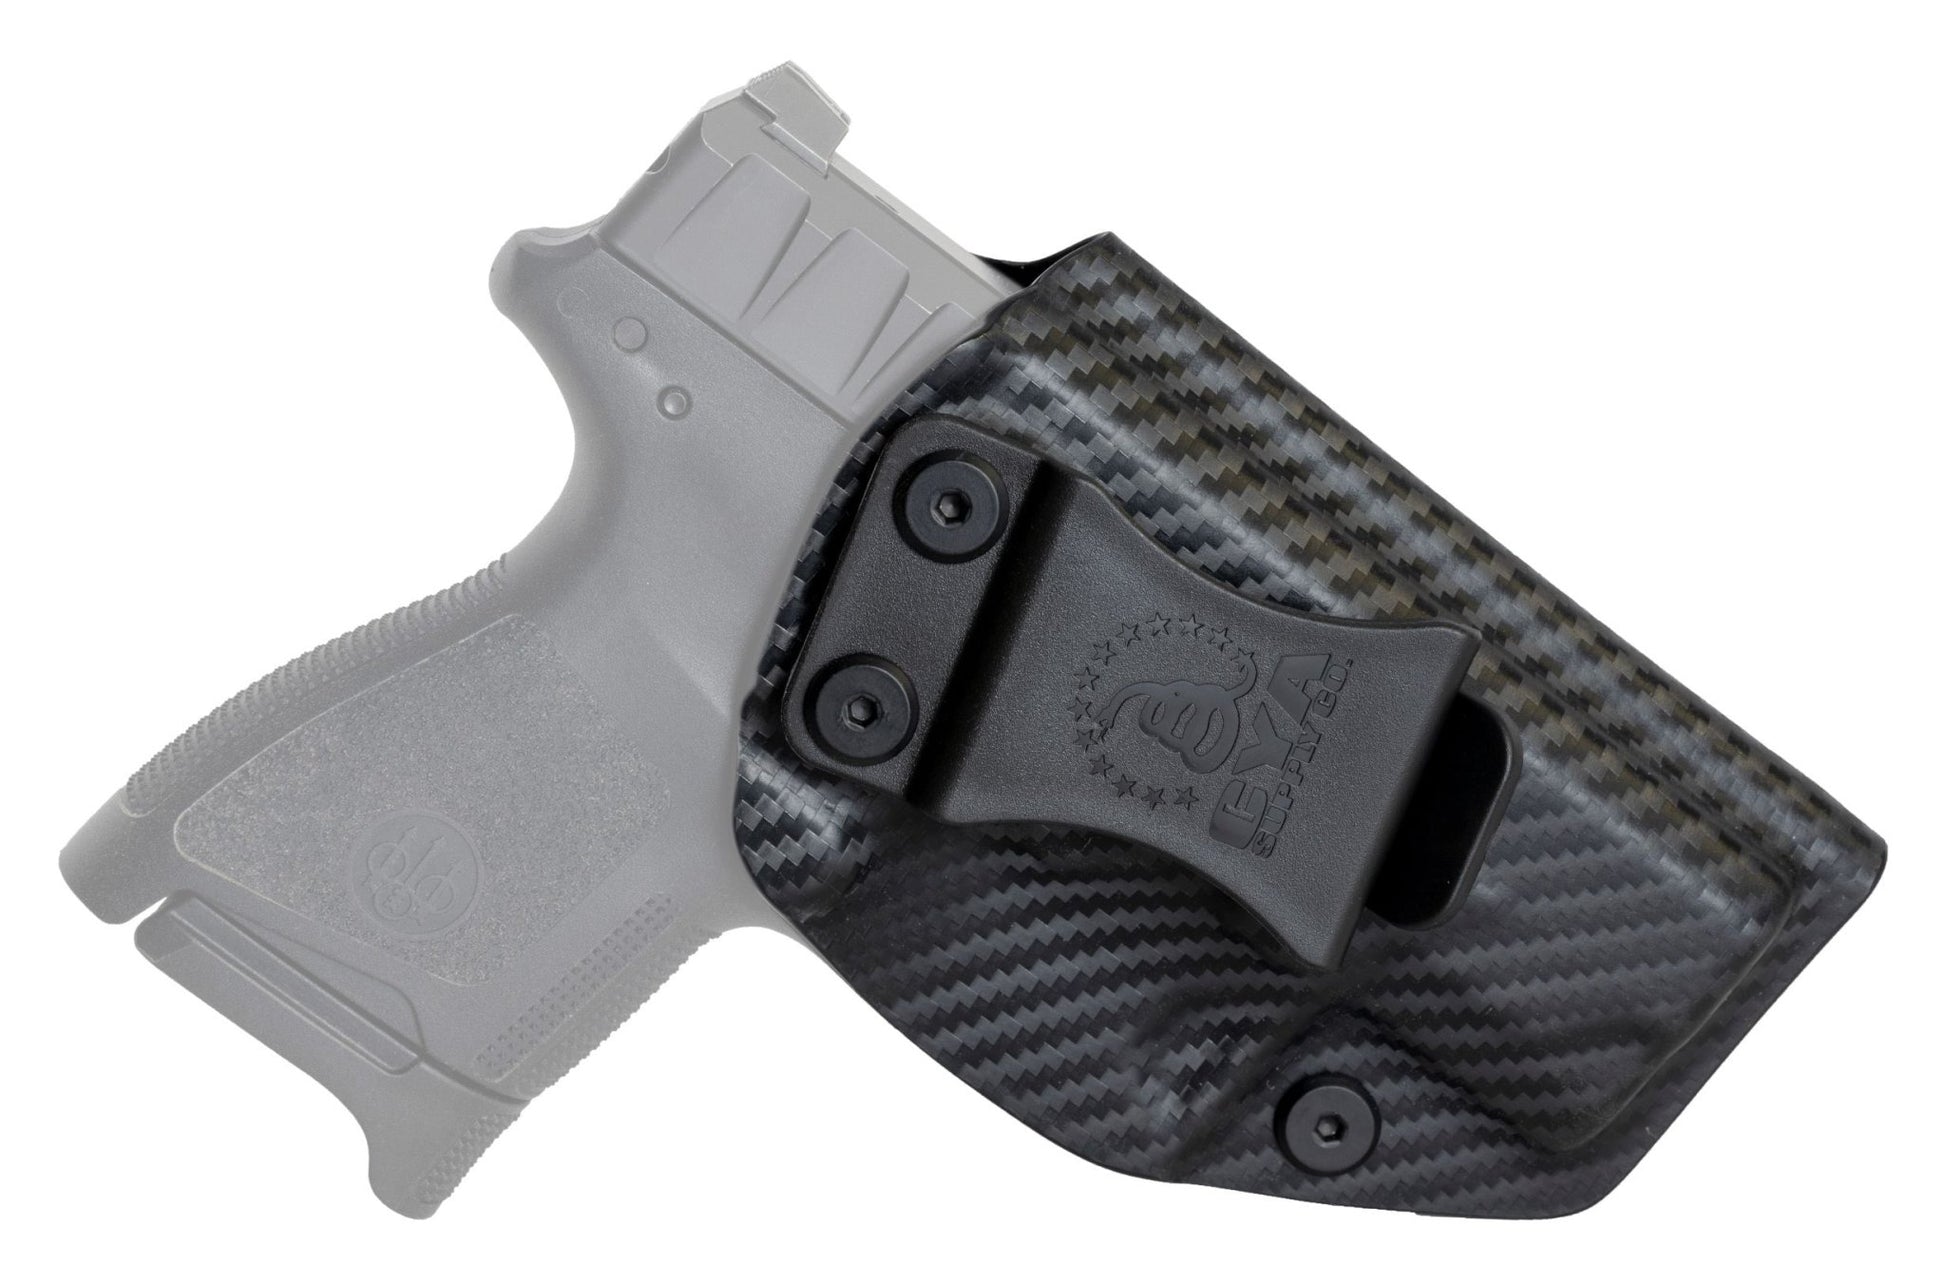 Beretta APX Carry Holster CYA Supply Co.